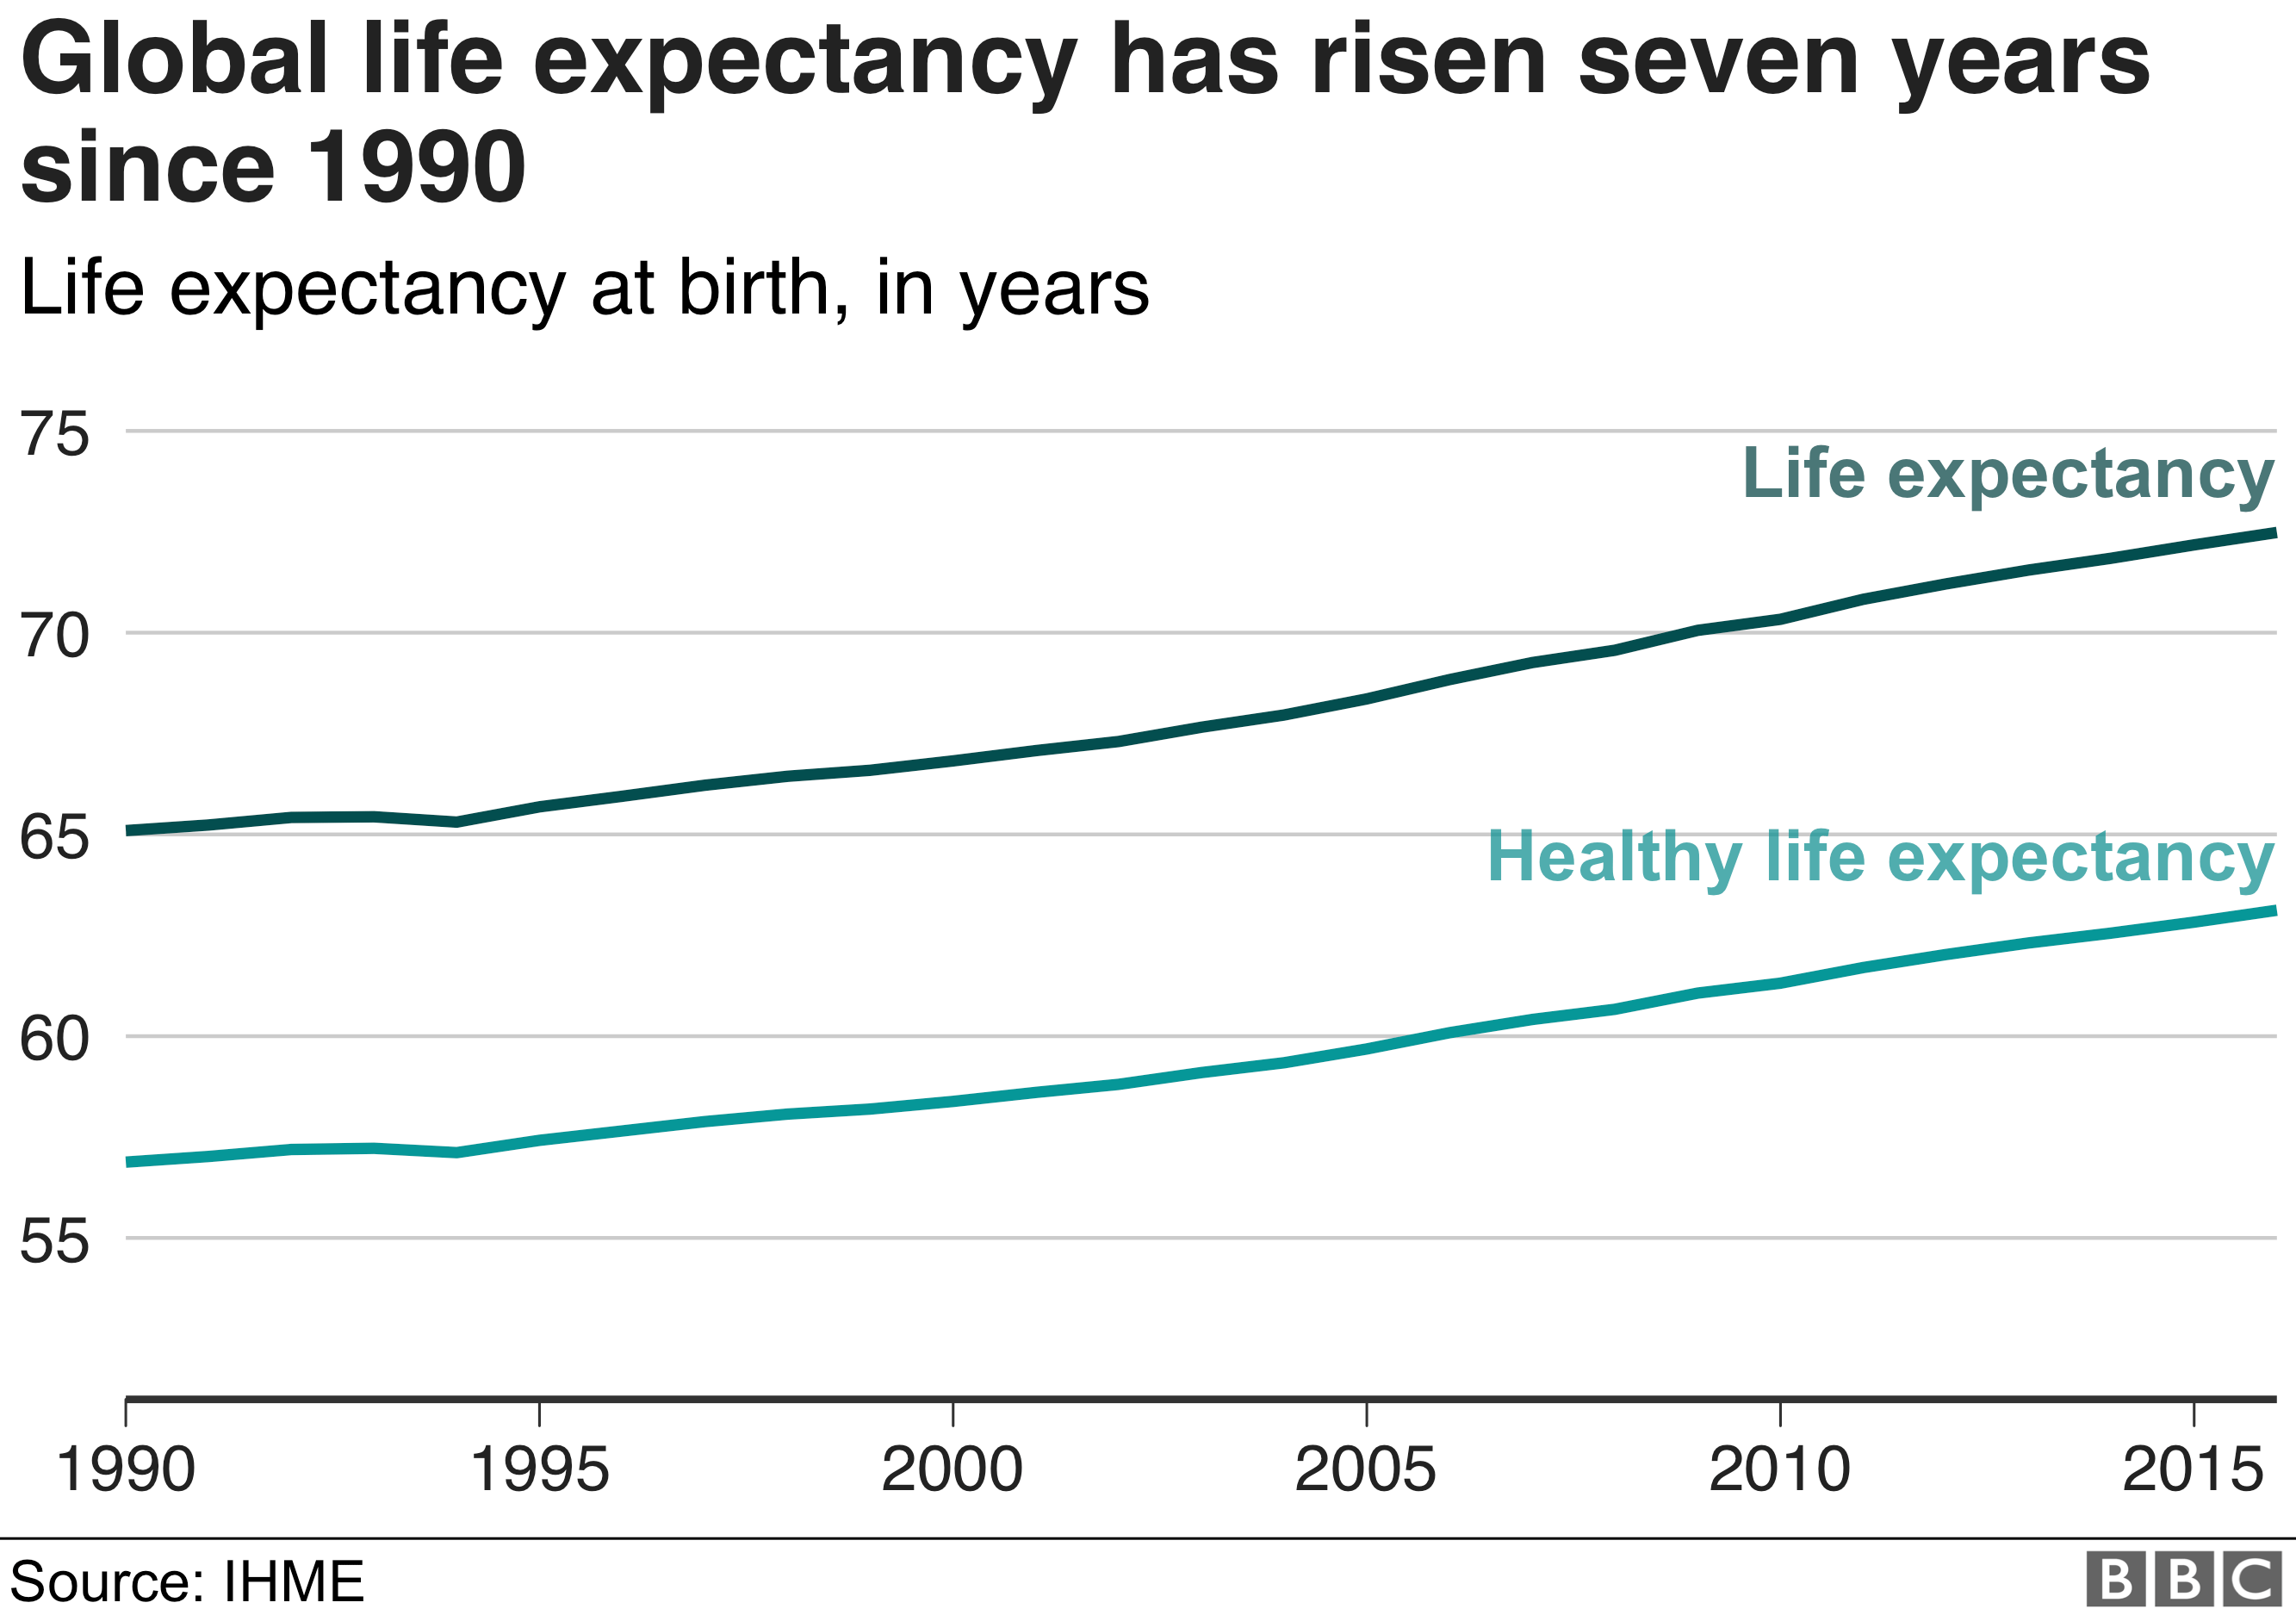 Chart showing how global life expectancy has increased seven years since 1990